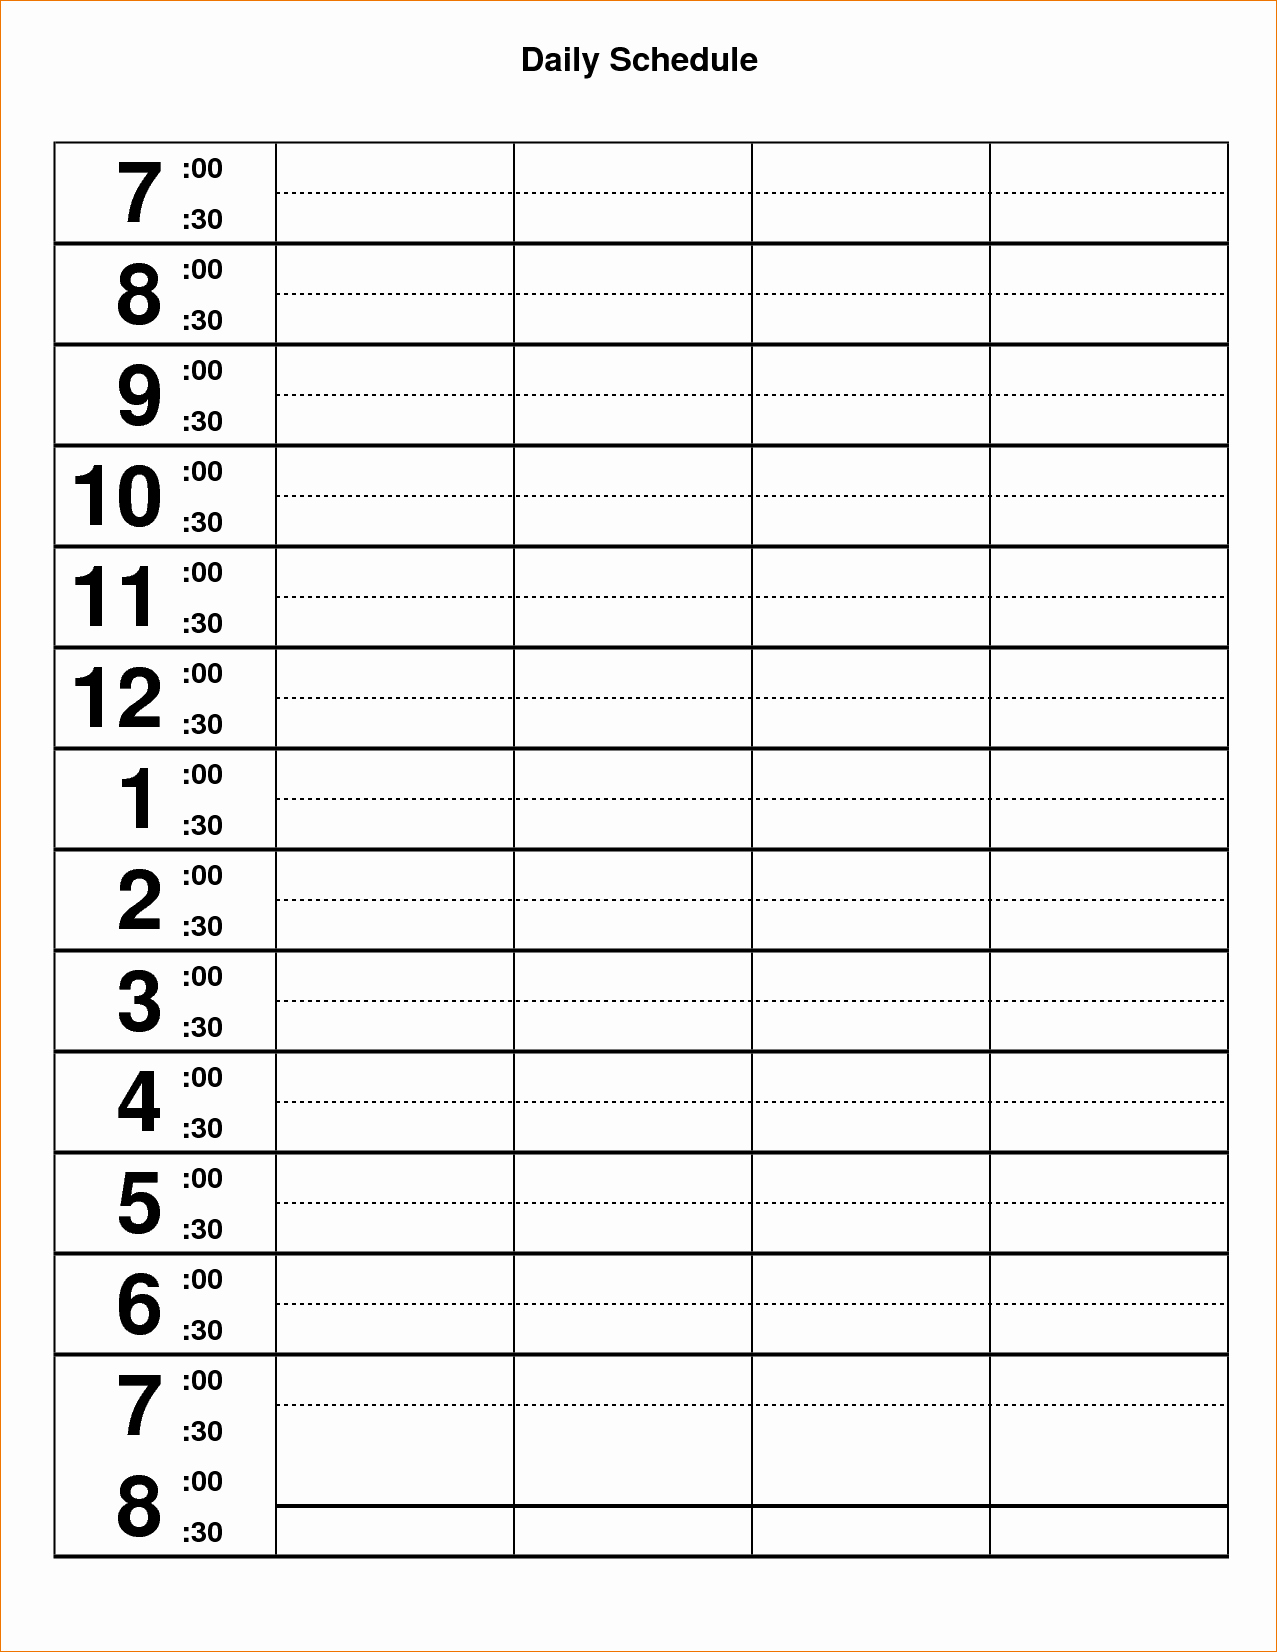 4 Excel Daily Schedule Template